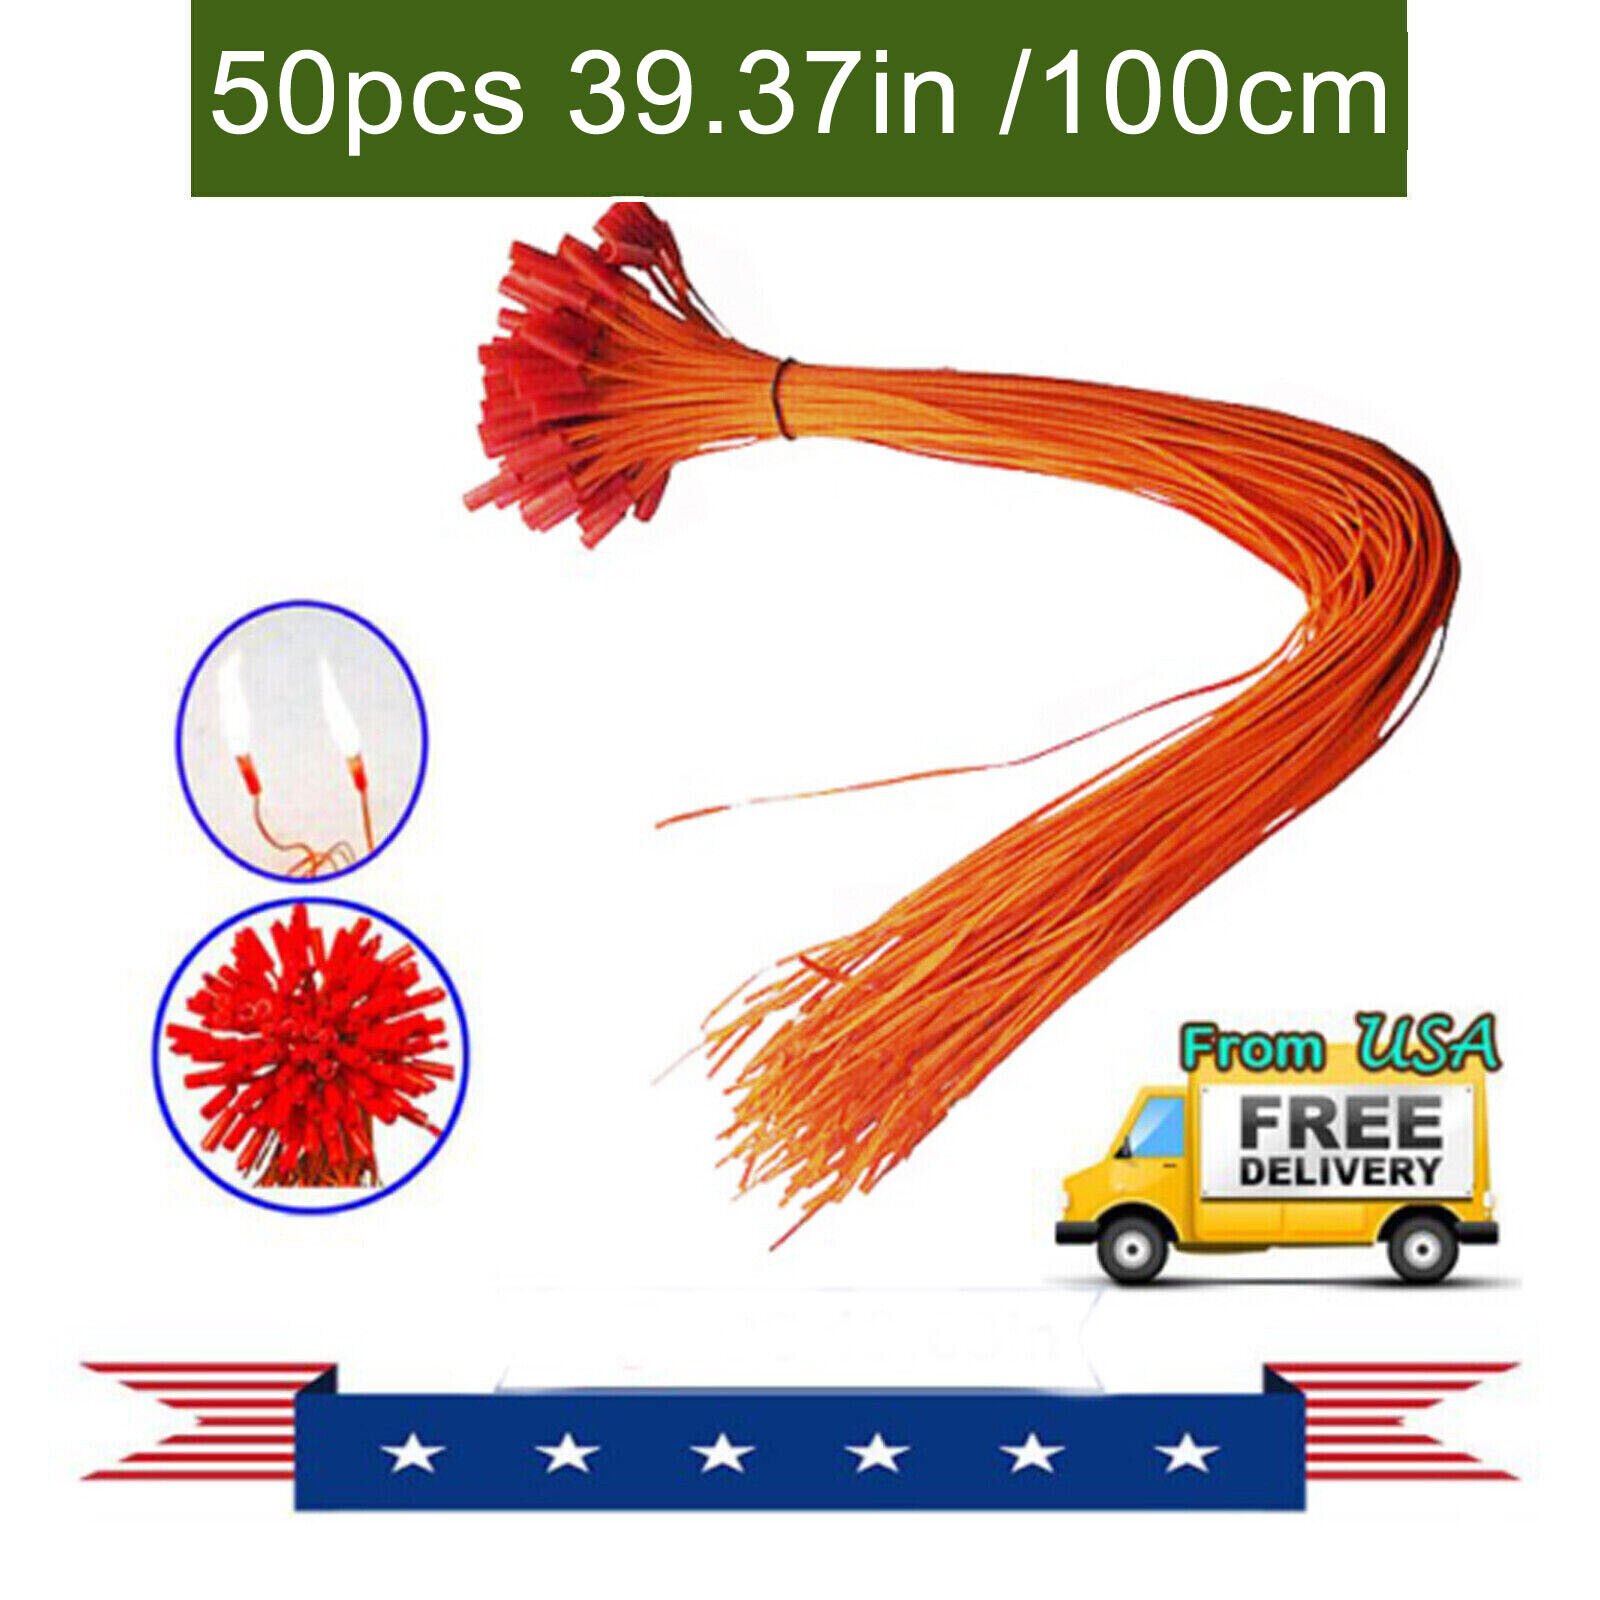 50pcs/lot 39.37in copper Remote Firework Firing system connect wire orange line